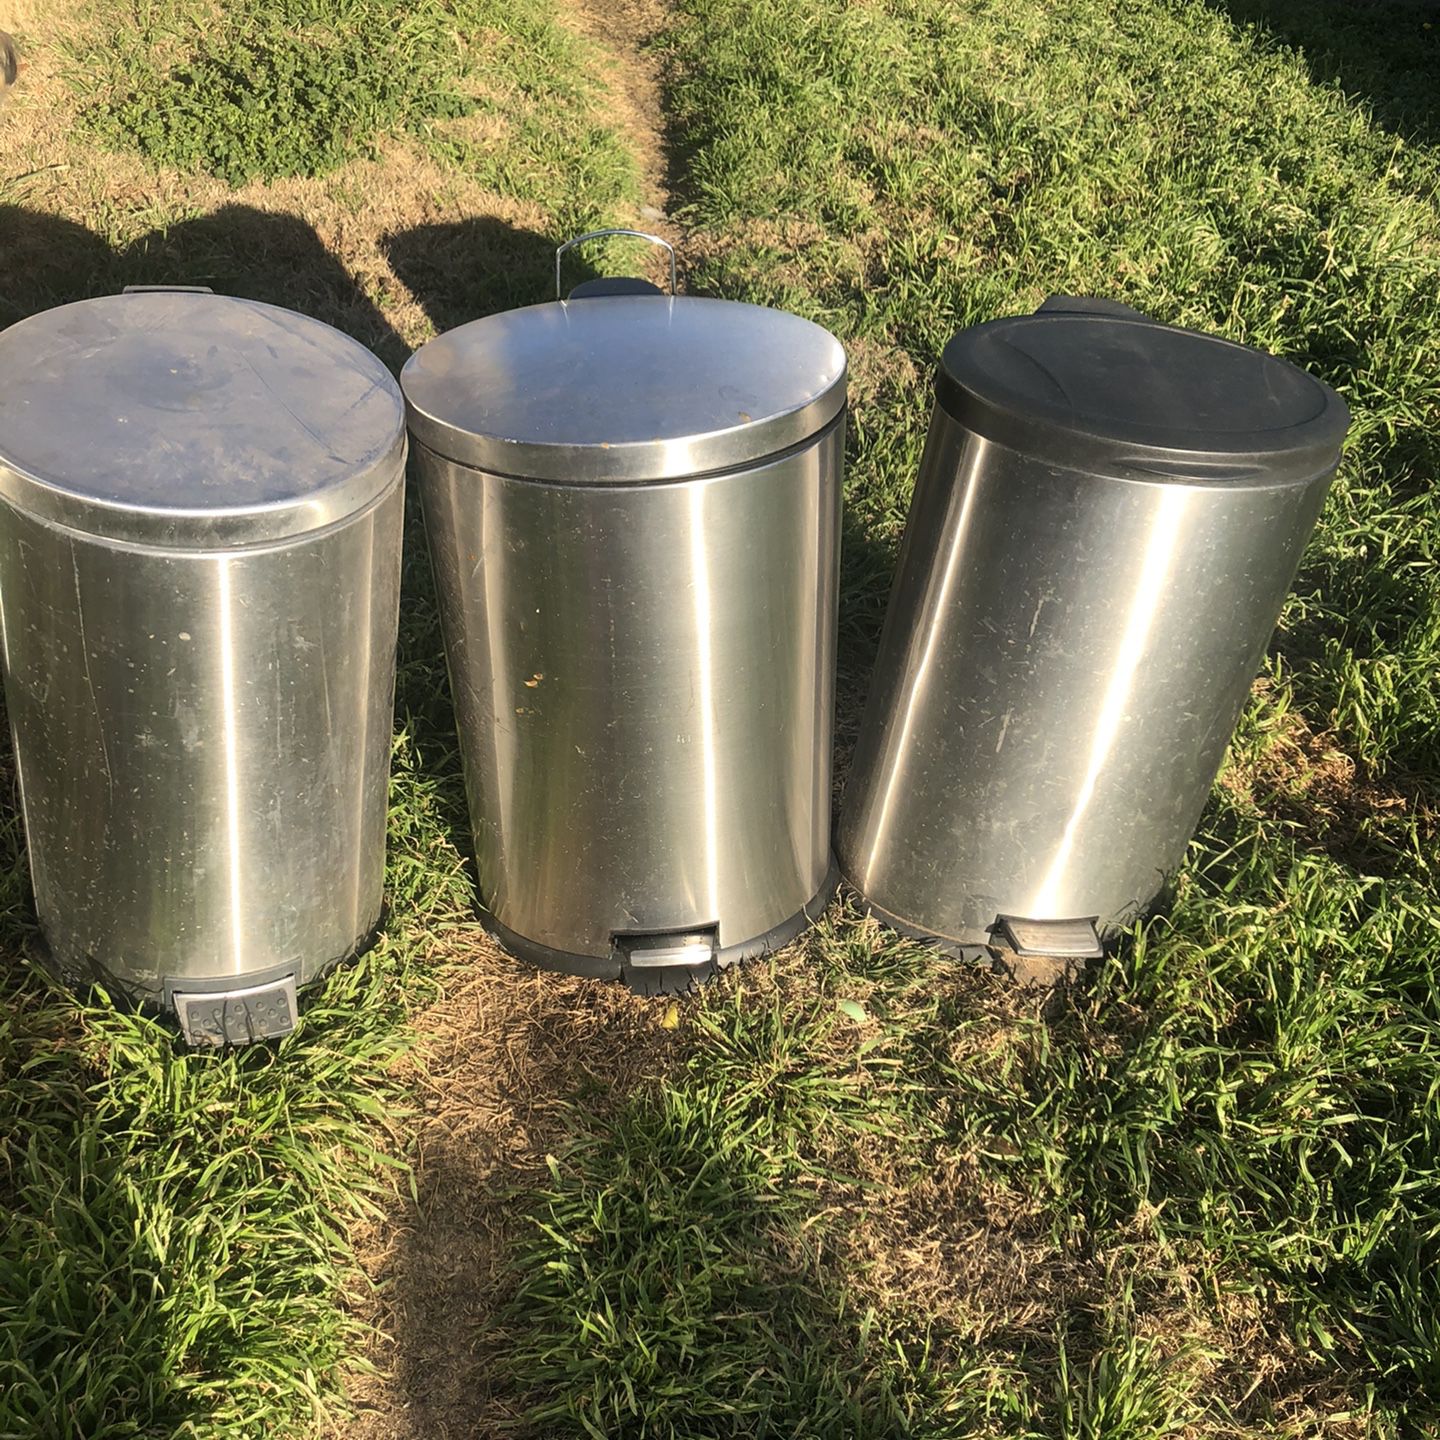 Steel Trashcans With Foot Pedals $25 Each